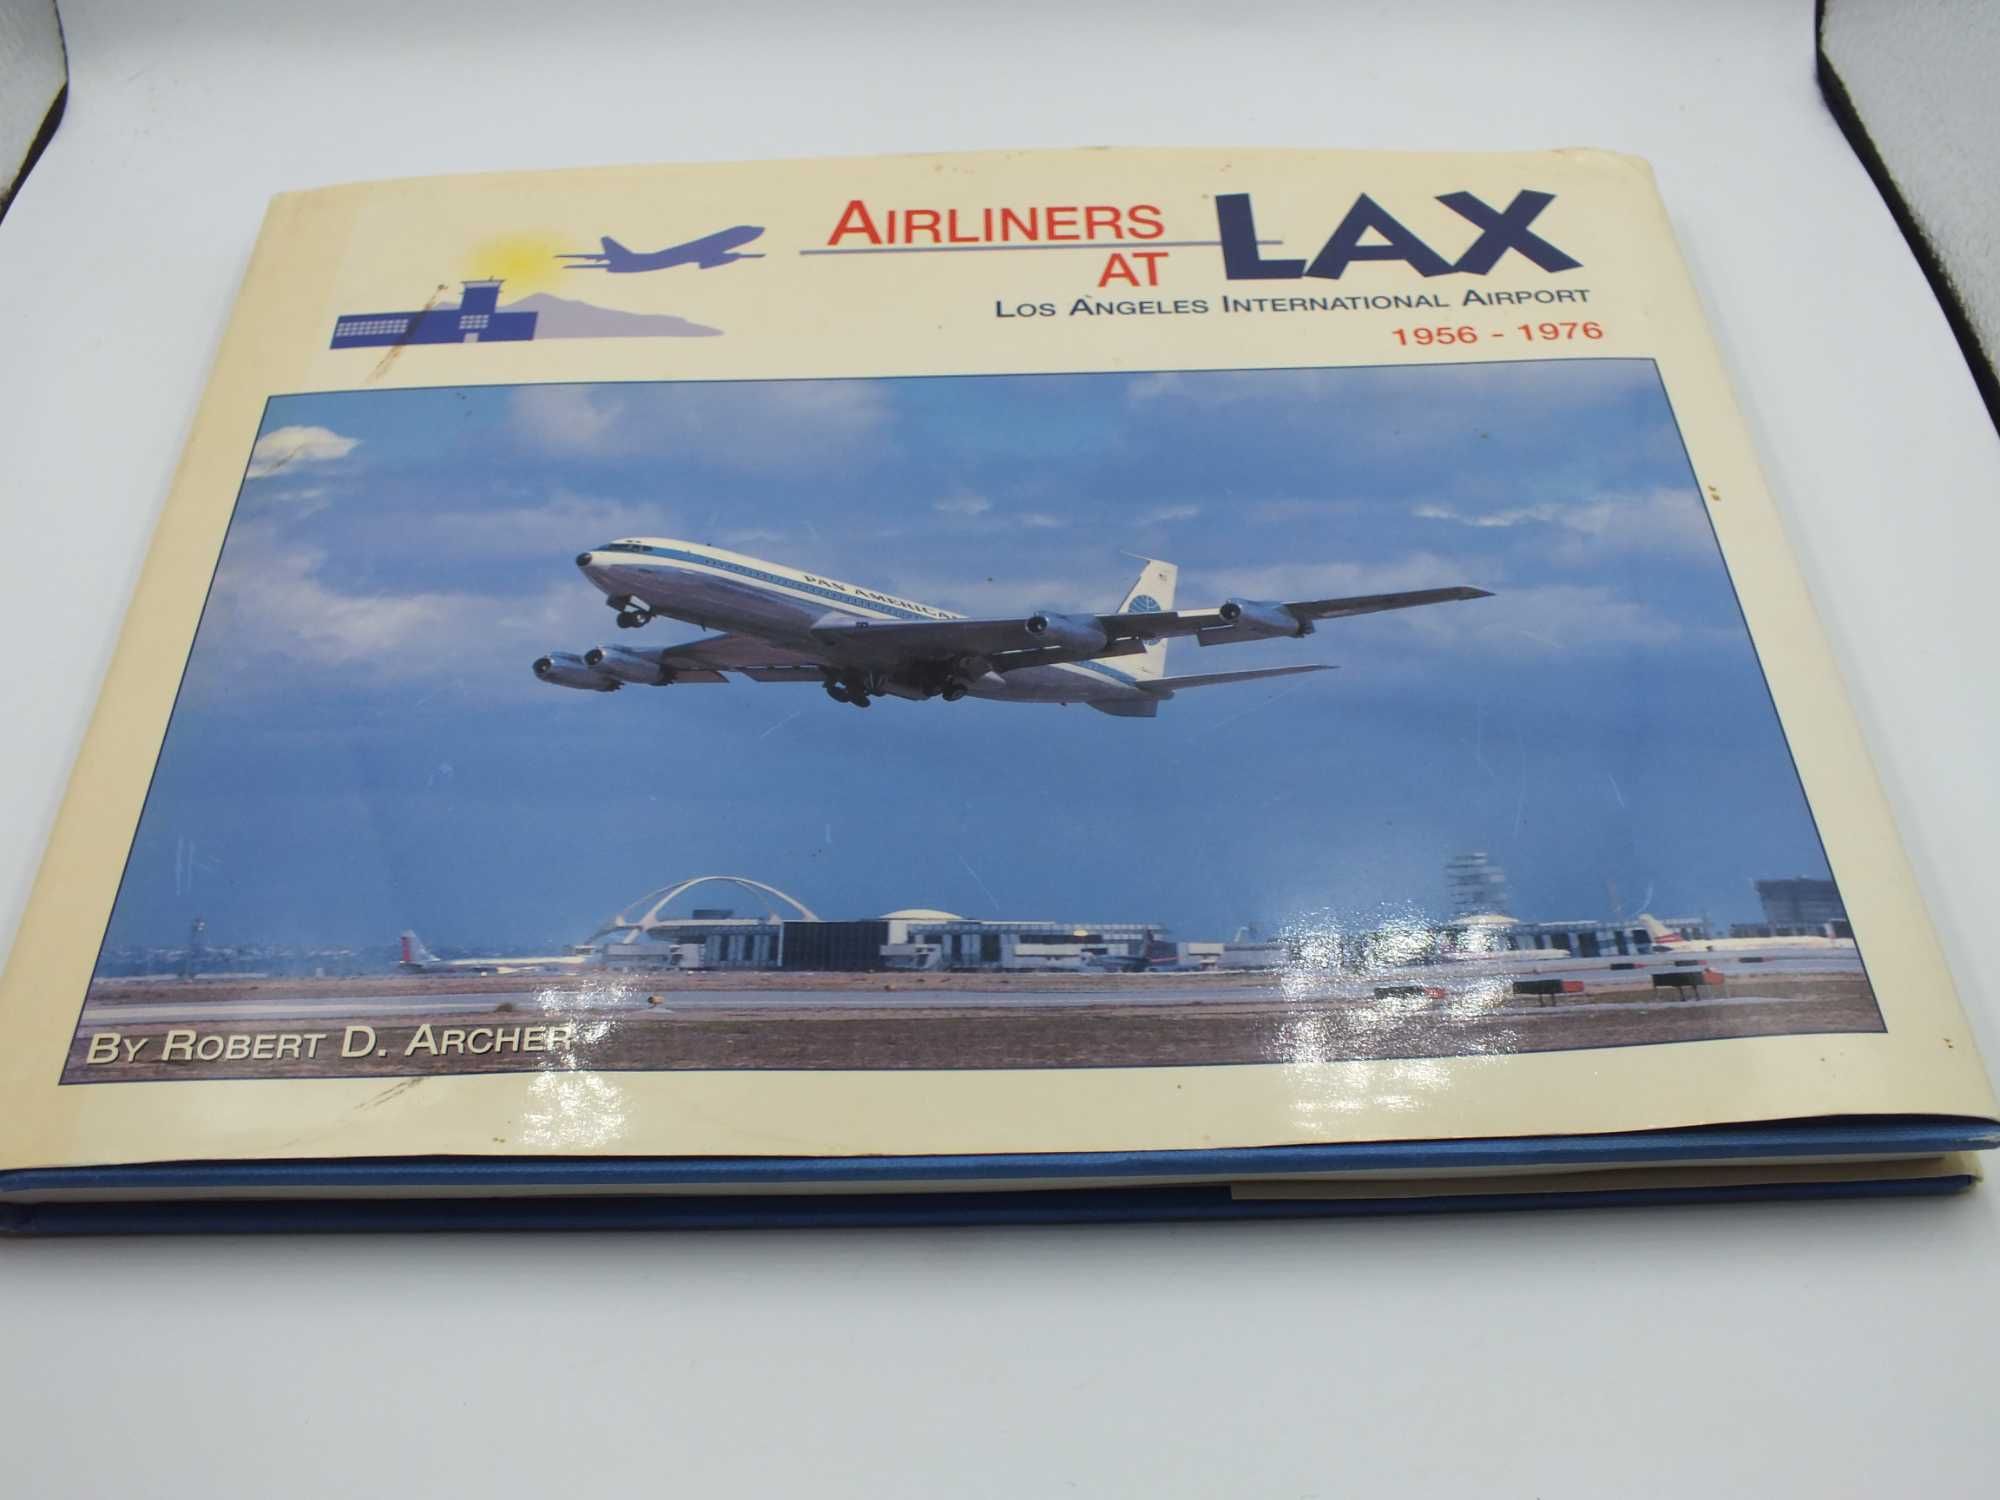 AIRLINES AT LAX - LOS ANGELES International Airport  1956/1976